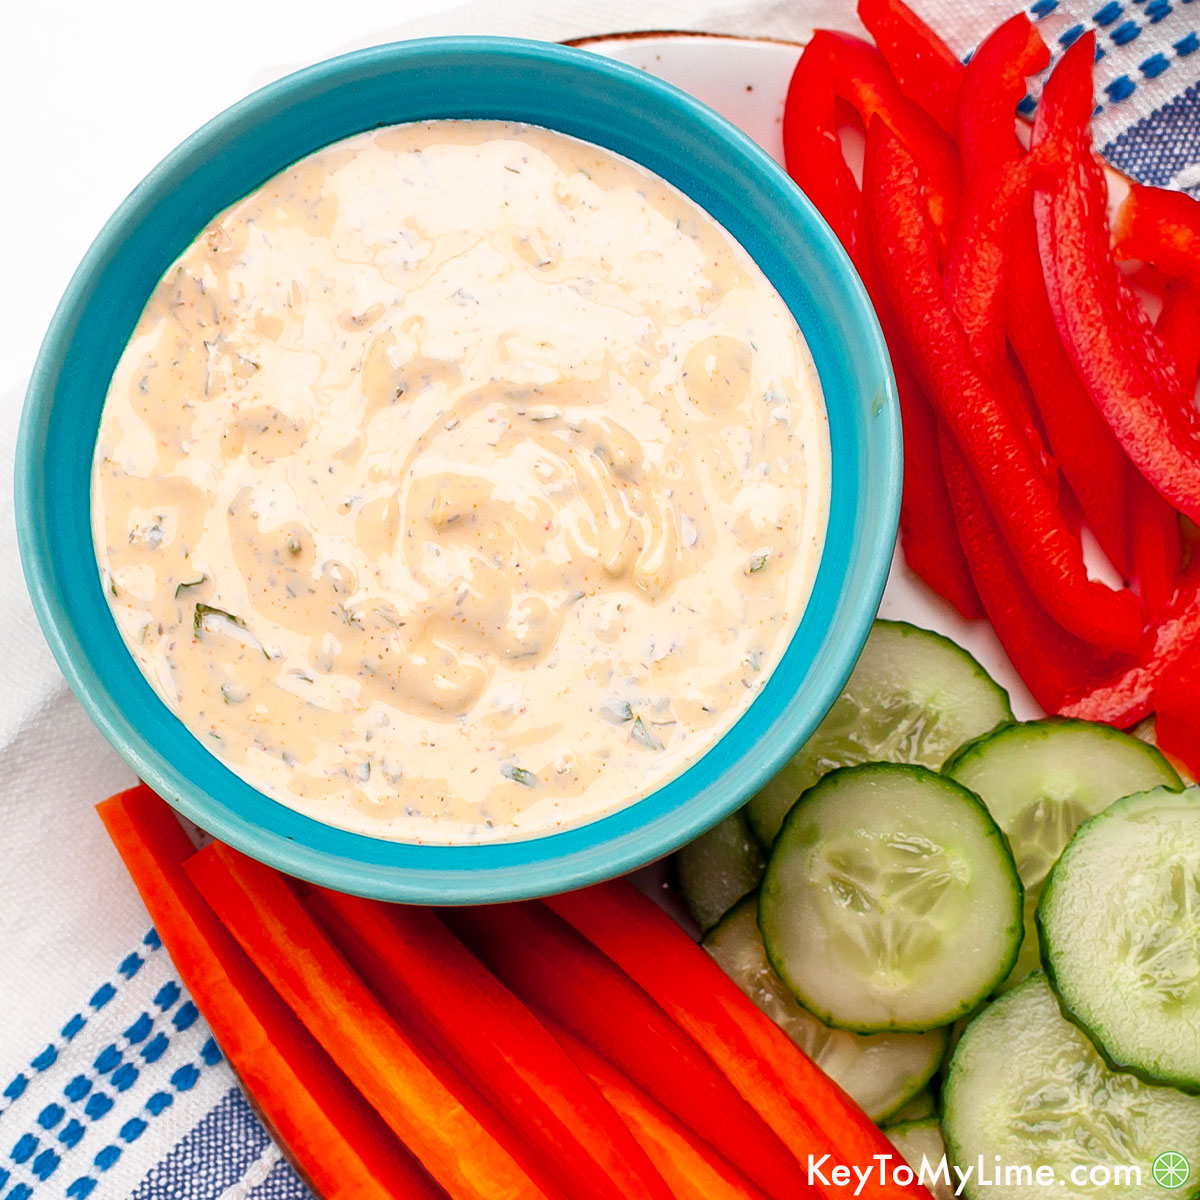 Spicy ranch in a small blue bowl surrounded by sliced carrots, cucumbers, and red bell pepper.